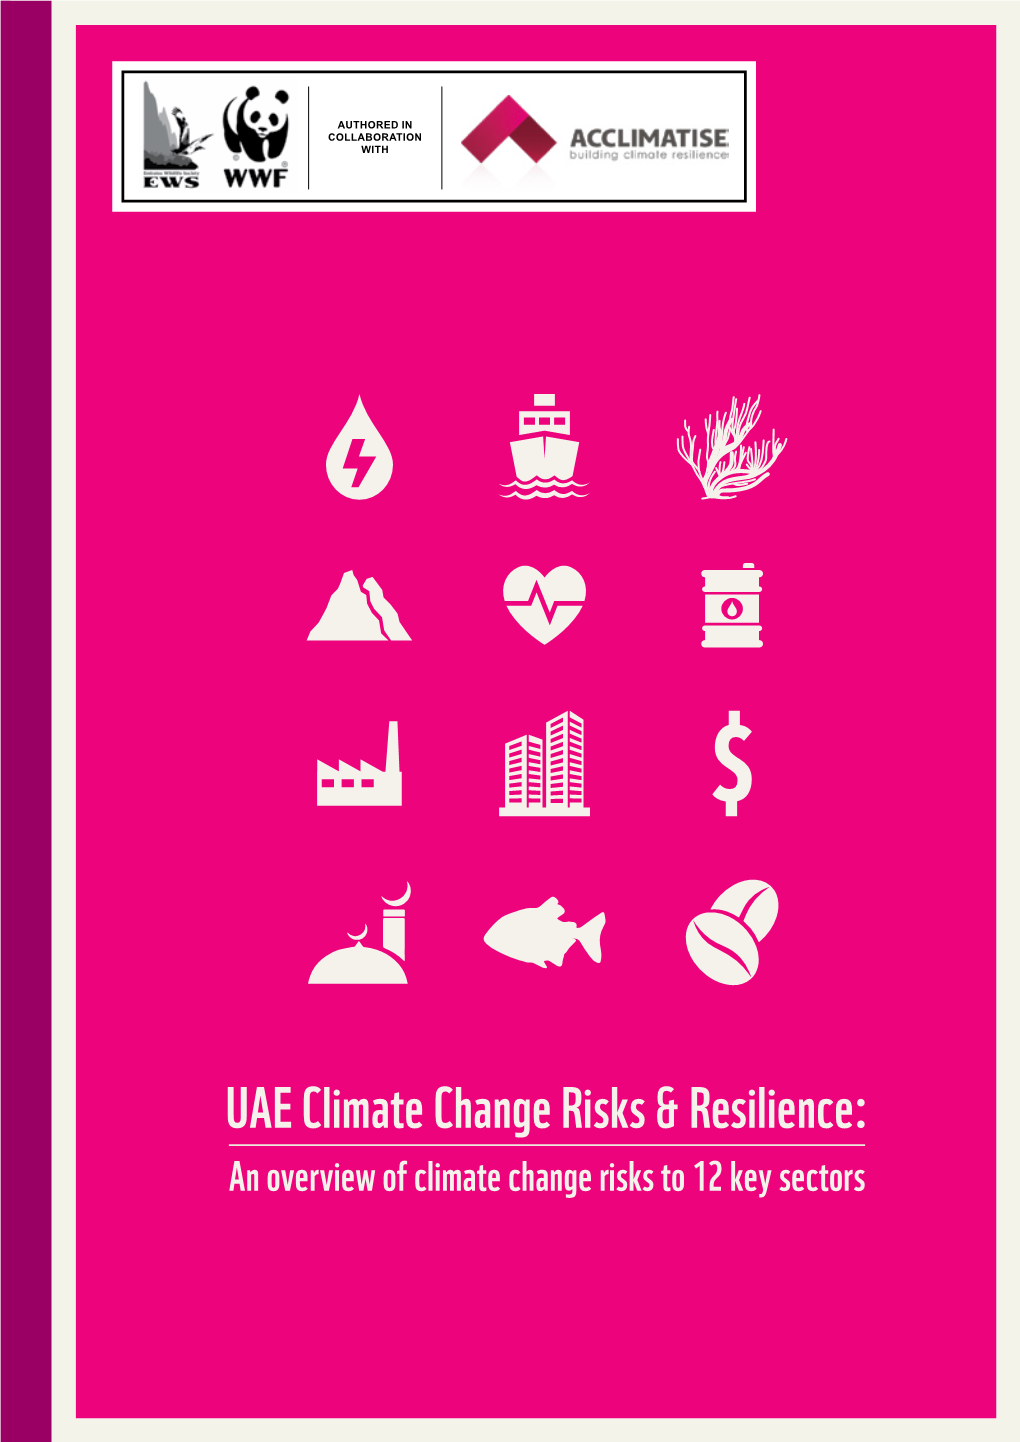 UAE Climate Change Risks & Resilience